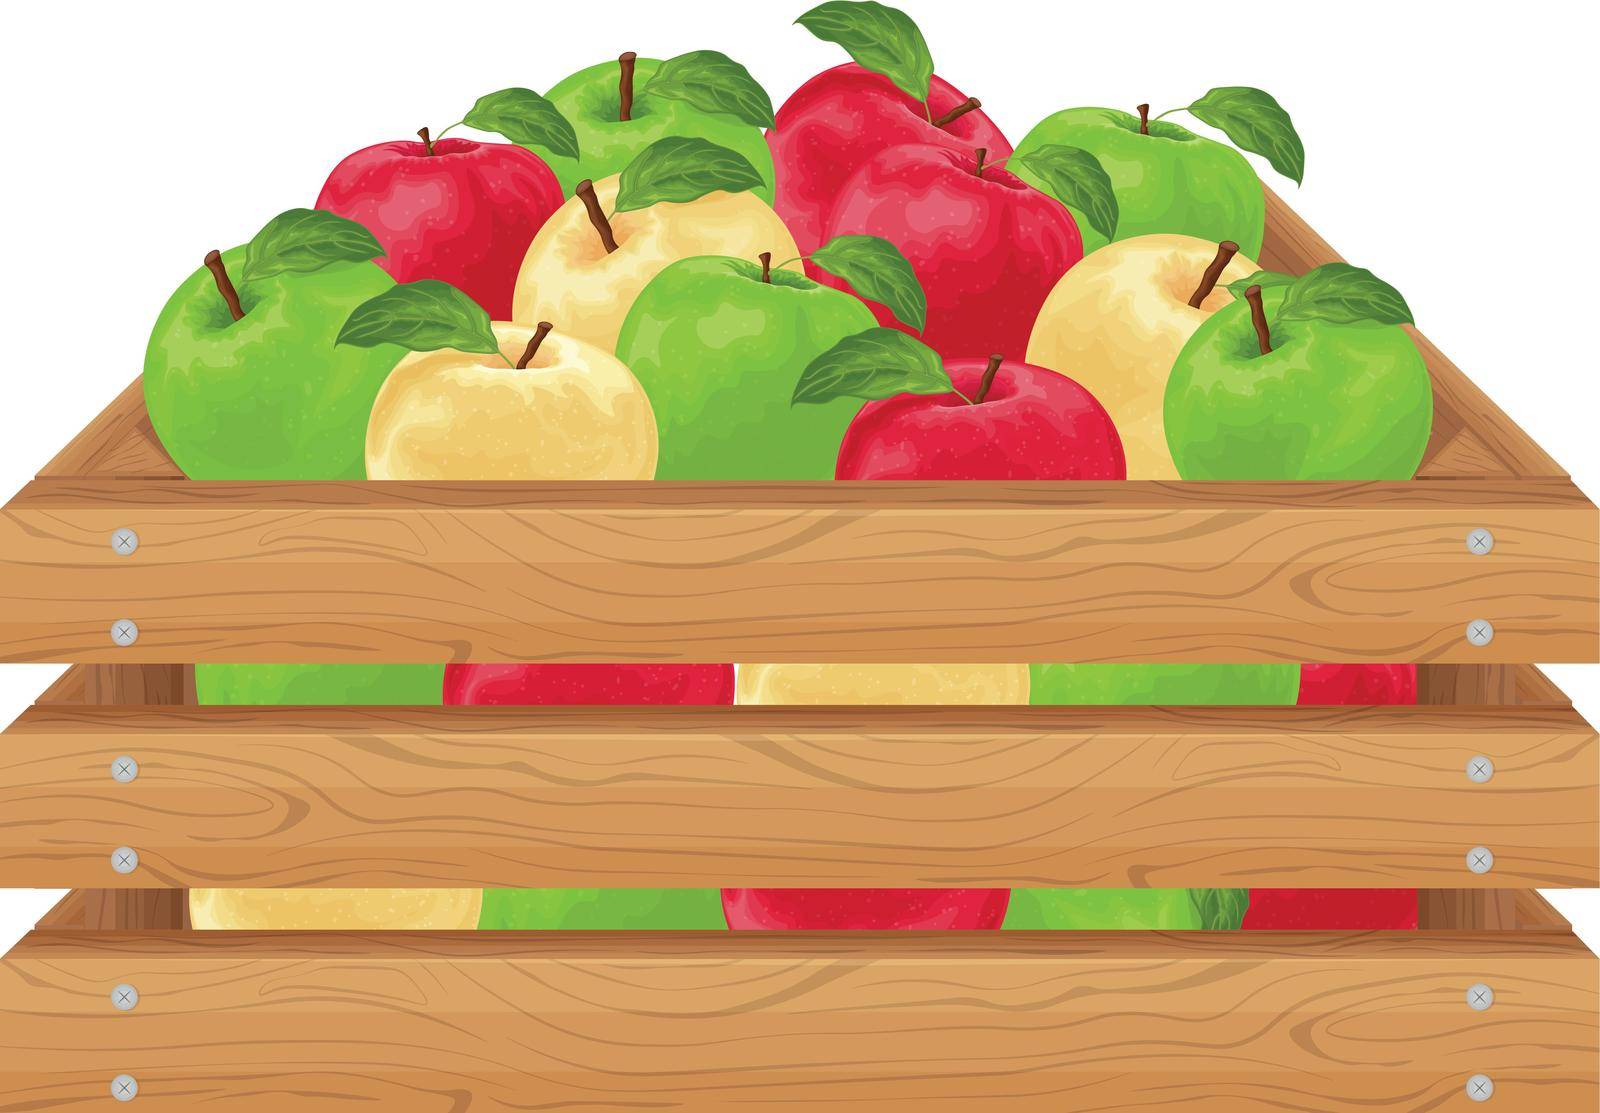 Apples. Ripe apples in a wooden box. A box with colorful apples. Ripe fruit. Organic vegetarian products. Farm products. Vector illustration isolated on a white background by NastyaN